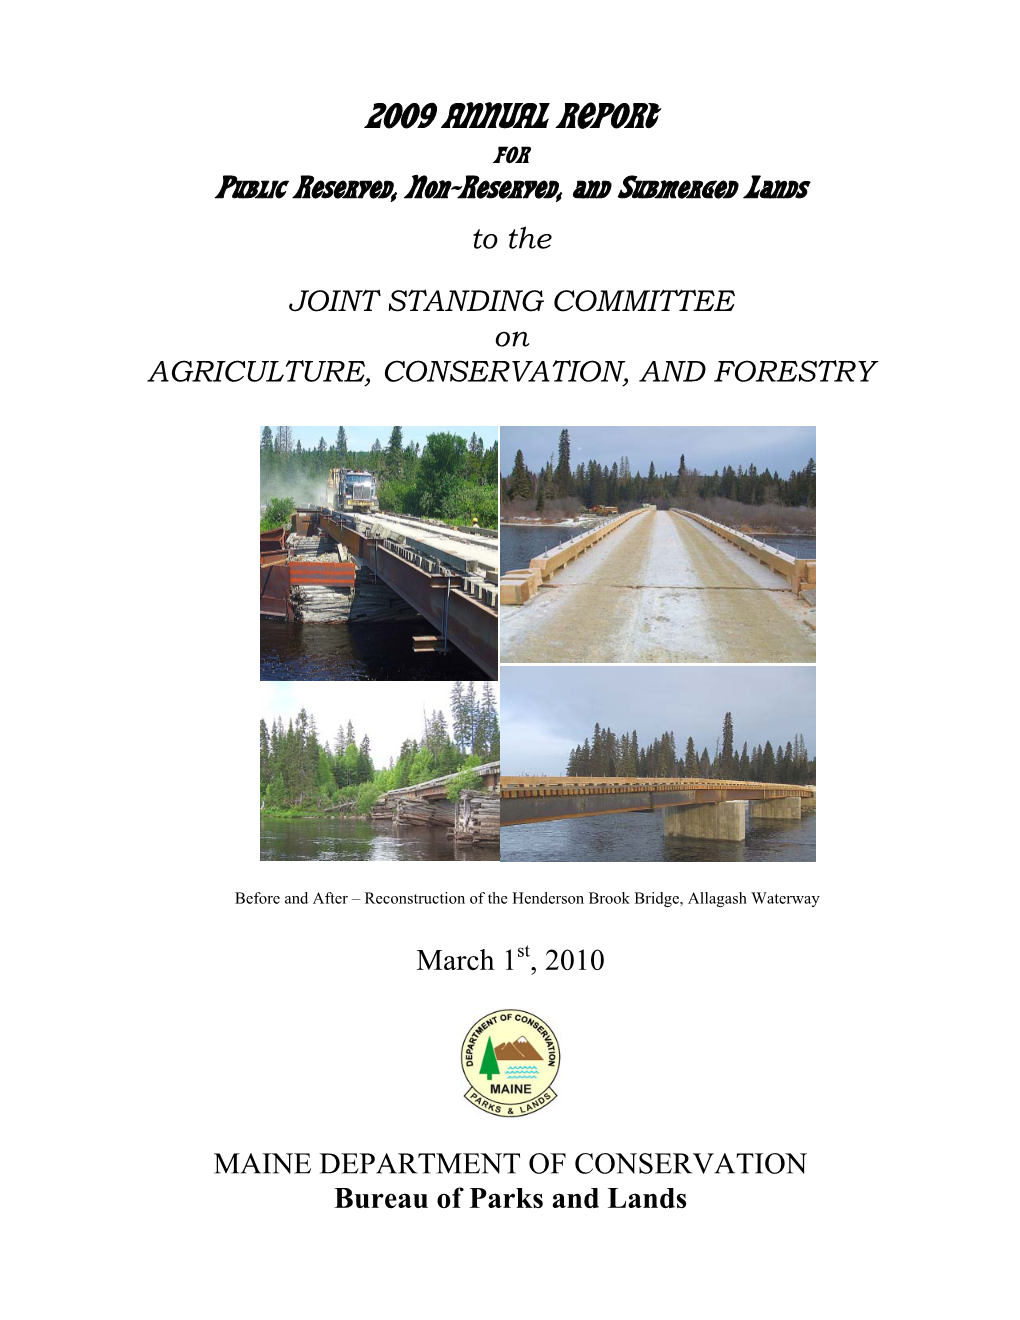 2009 ANNUAL REPORT for Public Reserved, Non-Reserved, and Submerged Lands